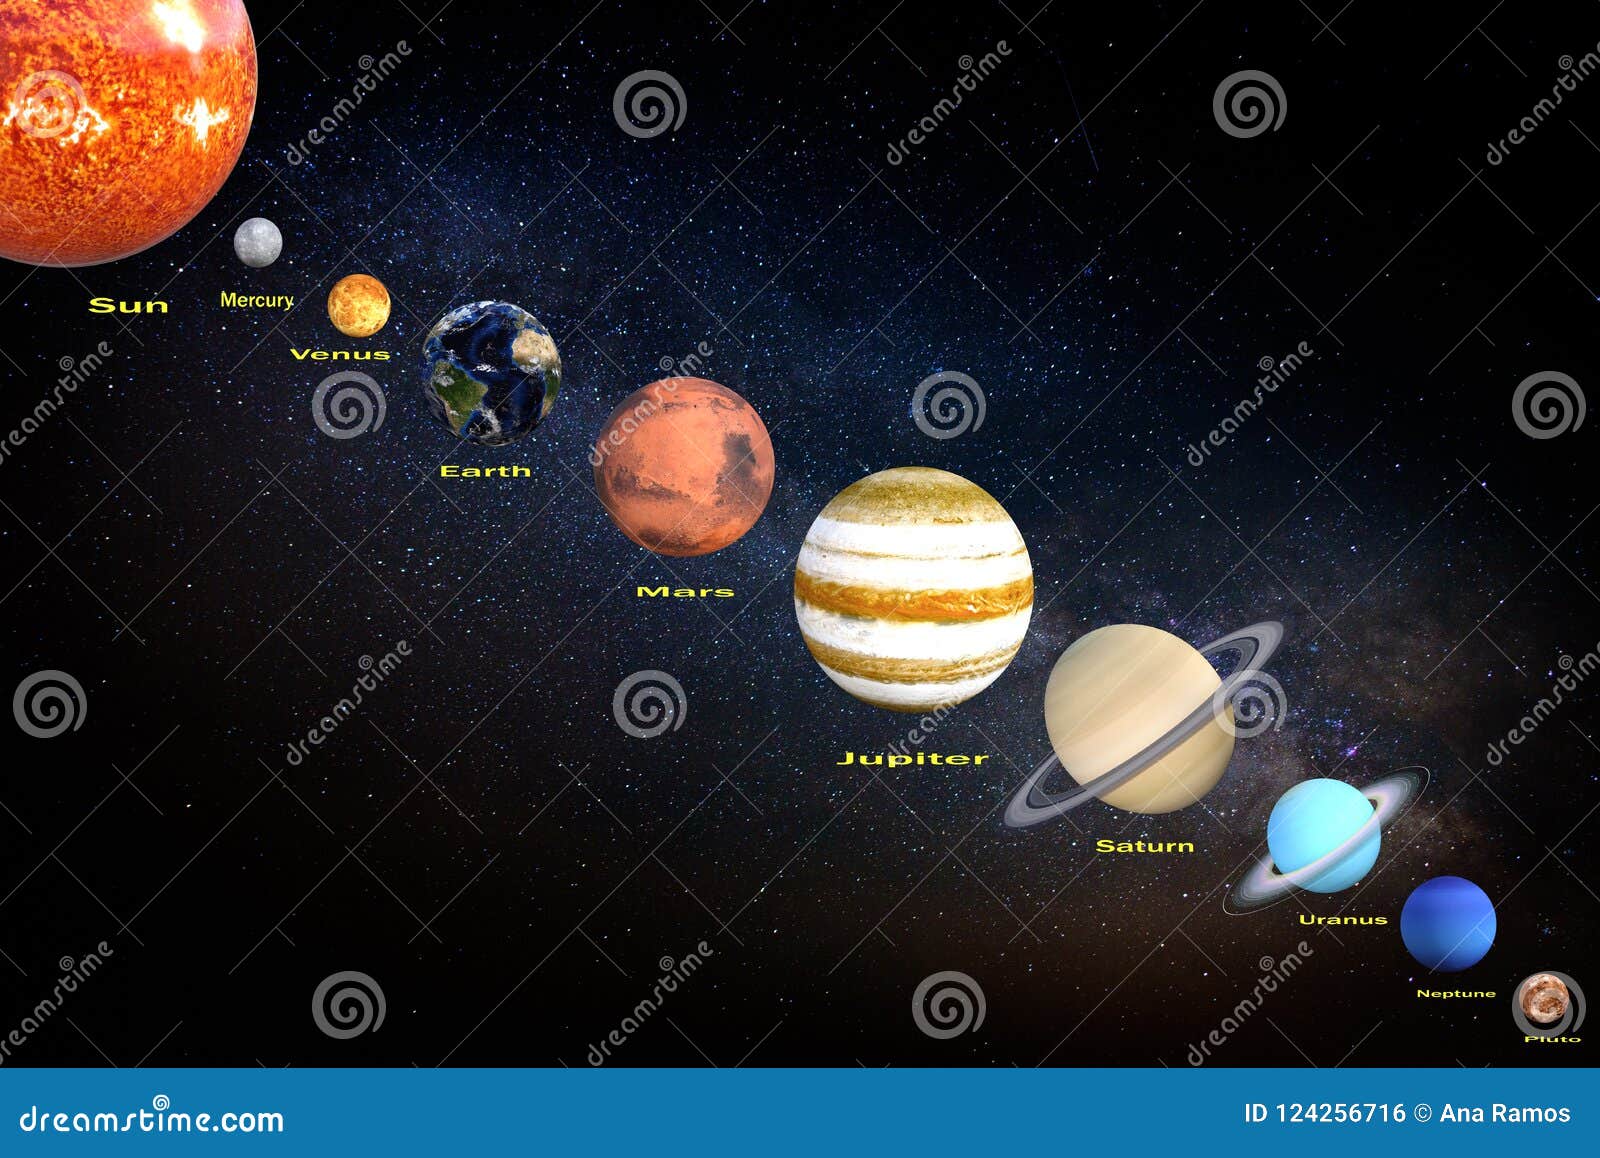 3d Rendering Of Solar System Planets And Sun Position On